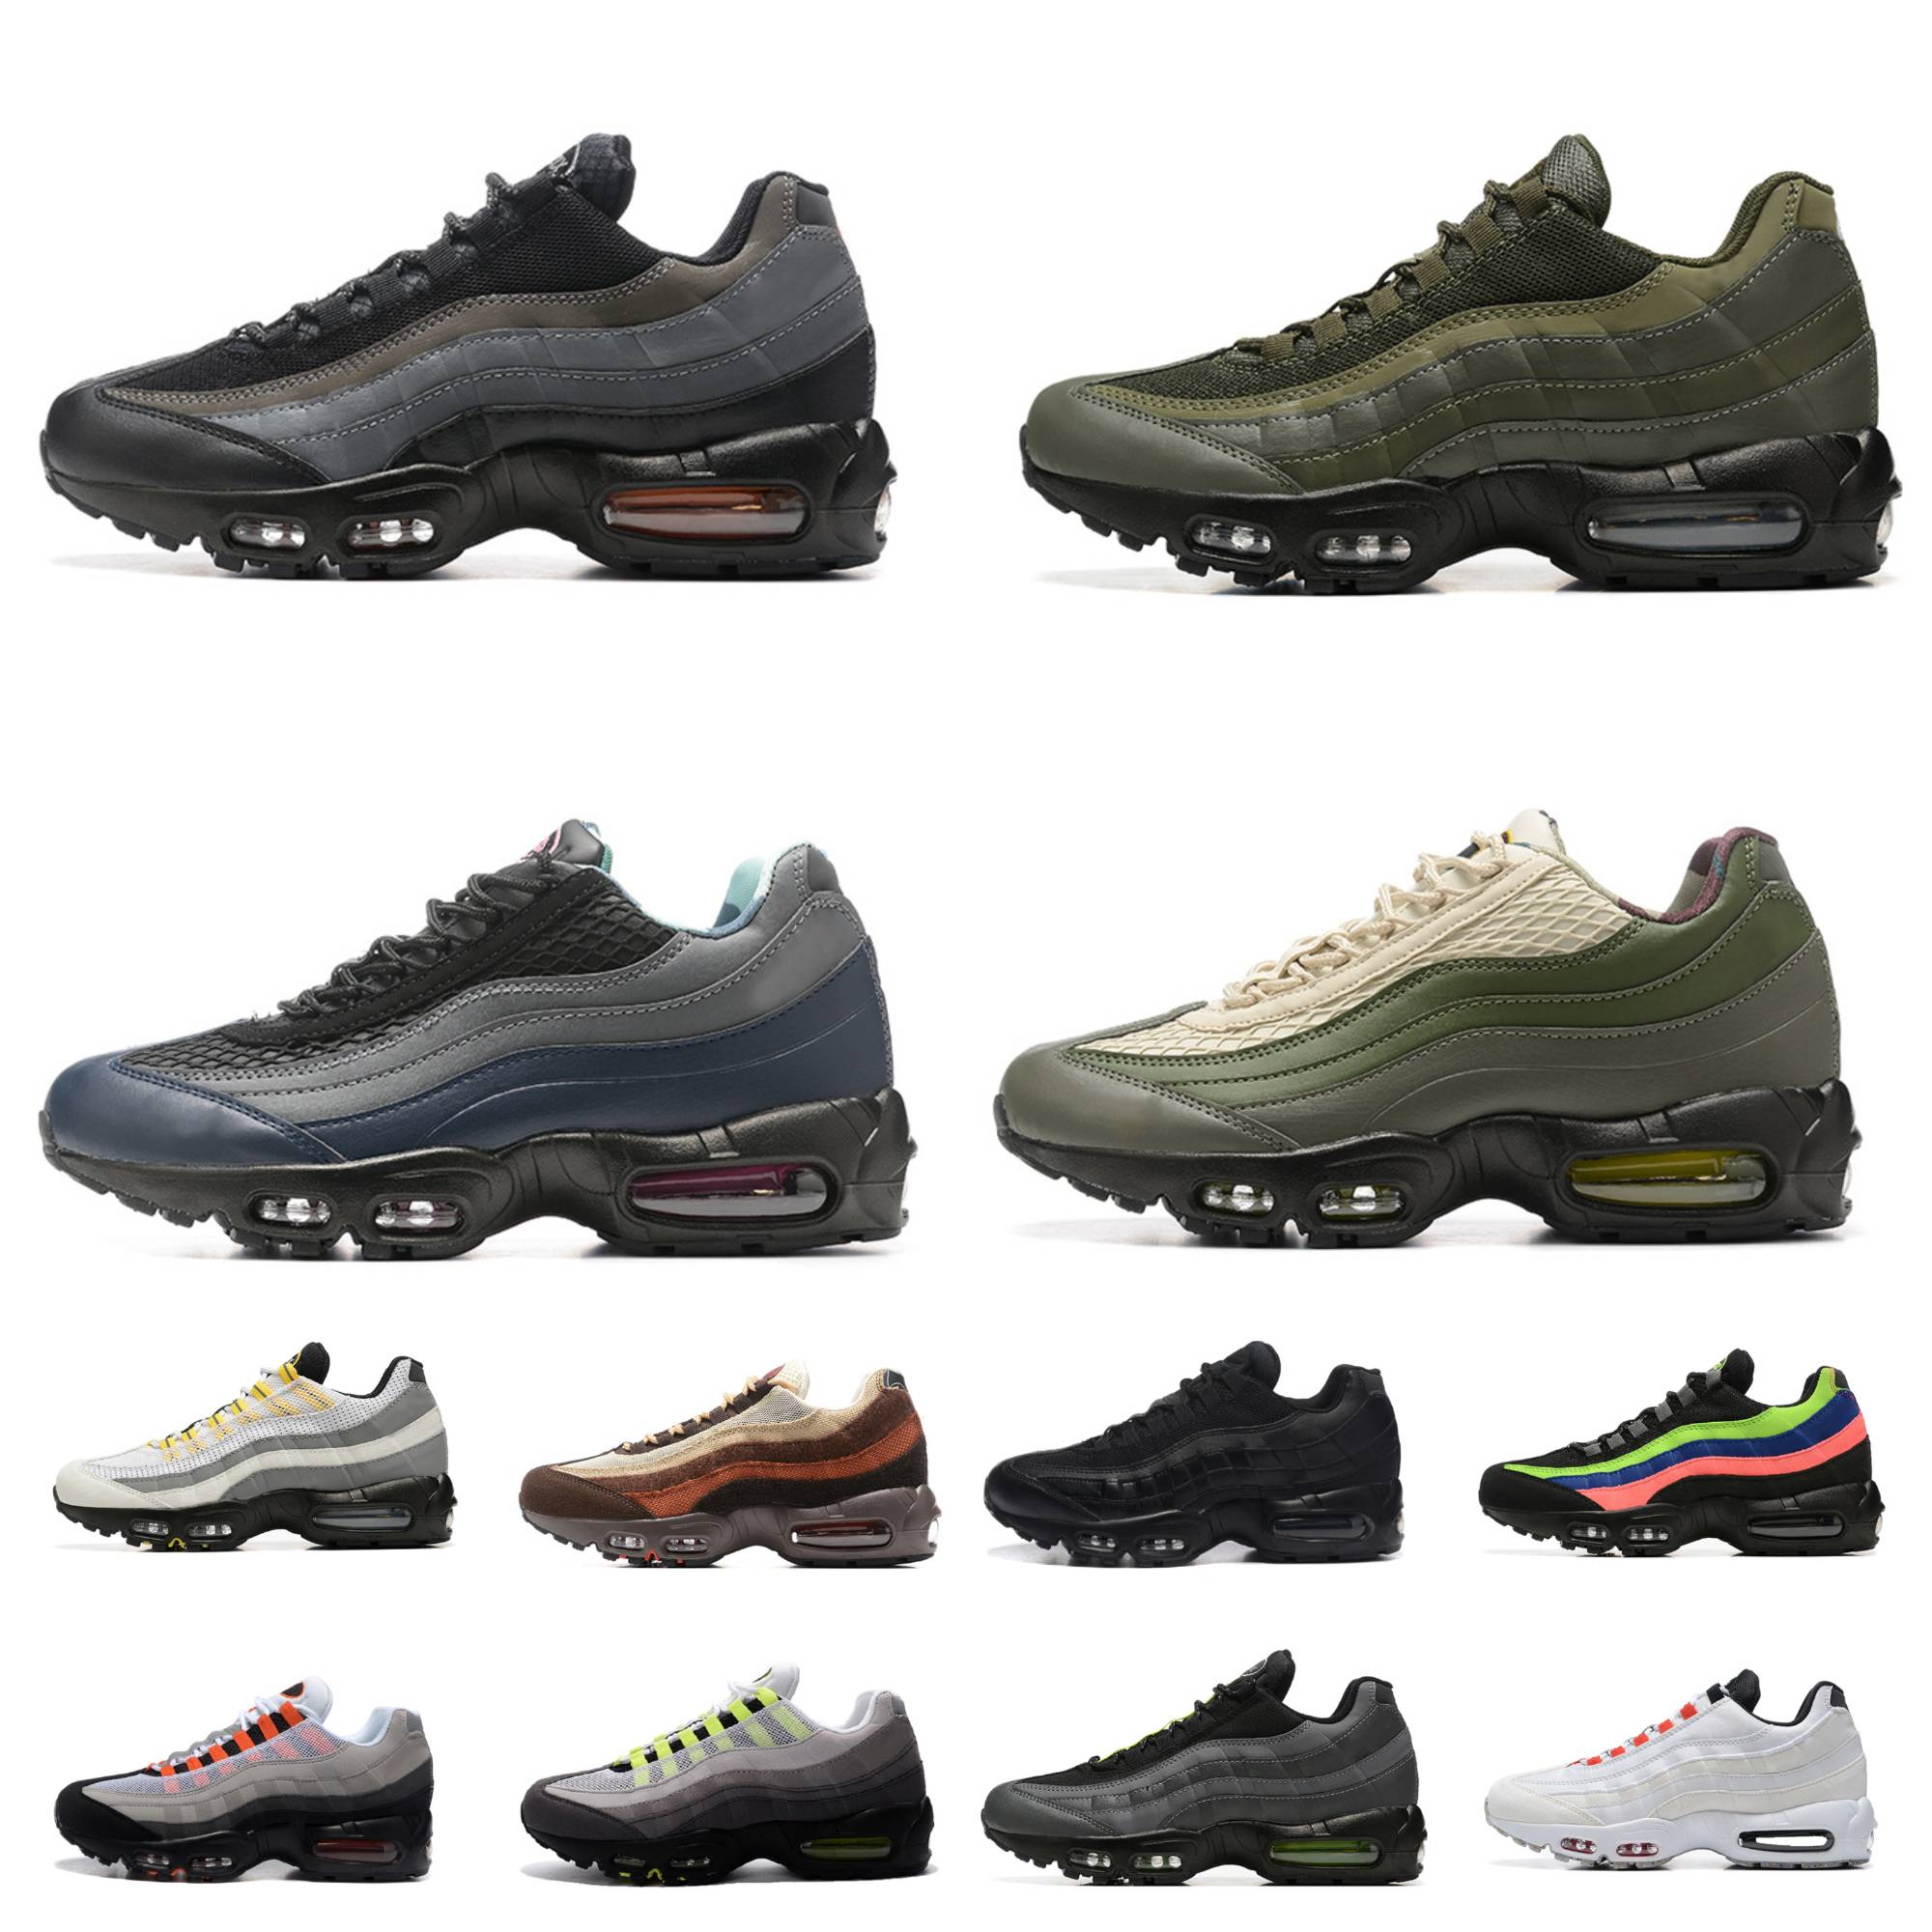 

2023 UNDEFEATED 95 airmaxs Running Shoes Max 95 Aegean Storm Gutta Green Reflective Safari Greedy 95s air Neon Triple Black White Grey Volt Anatomy Designer Sneakers, Bubble package bag